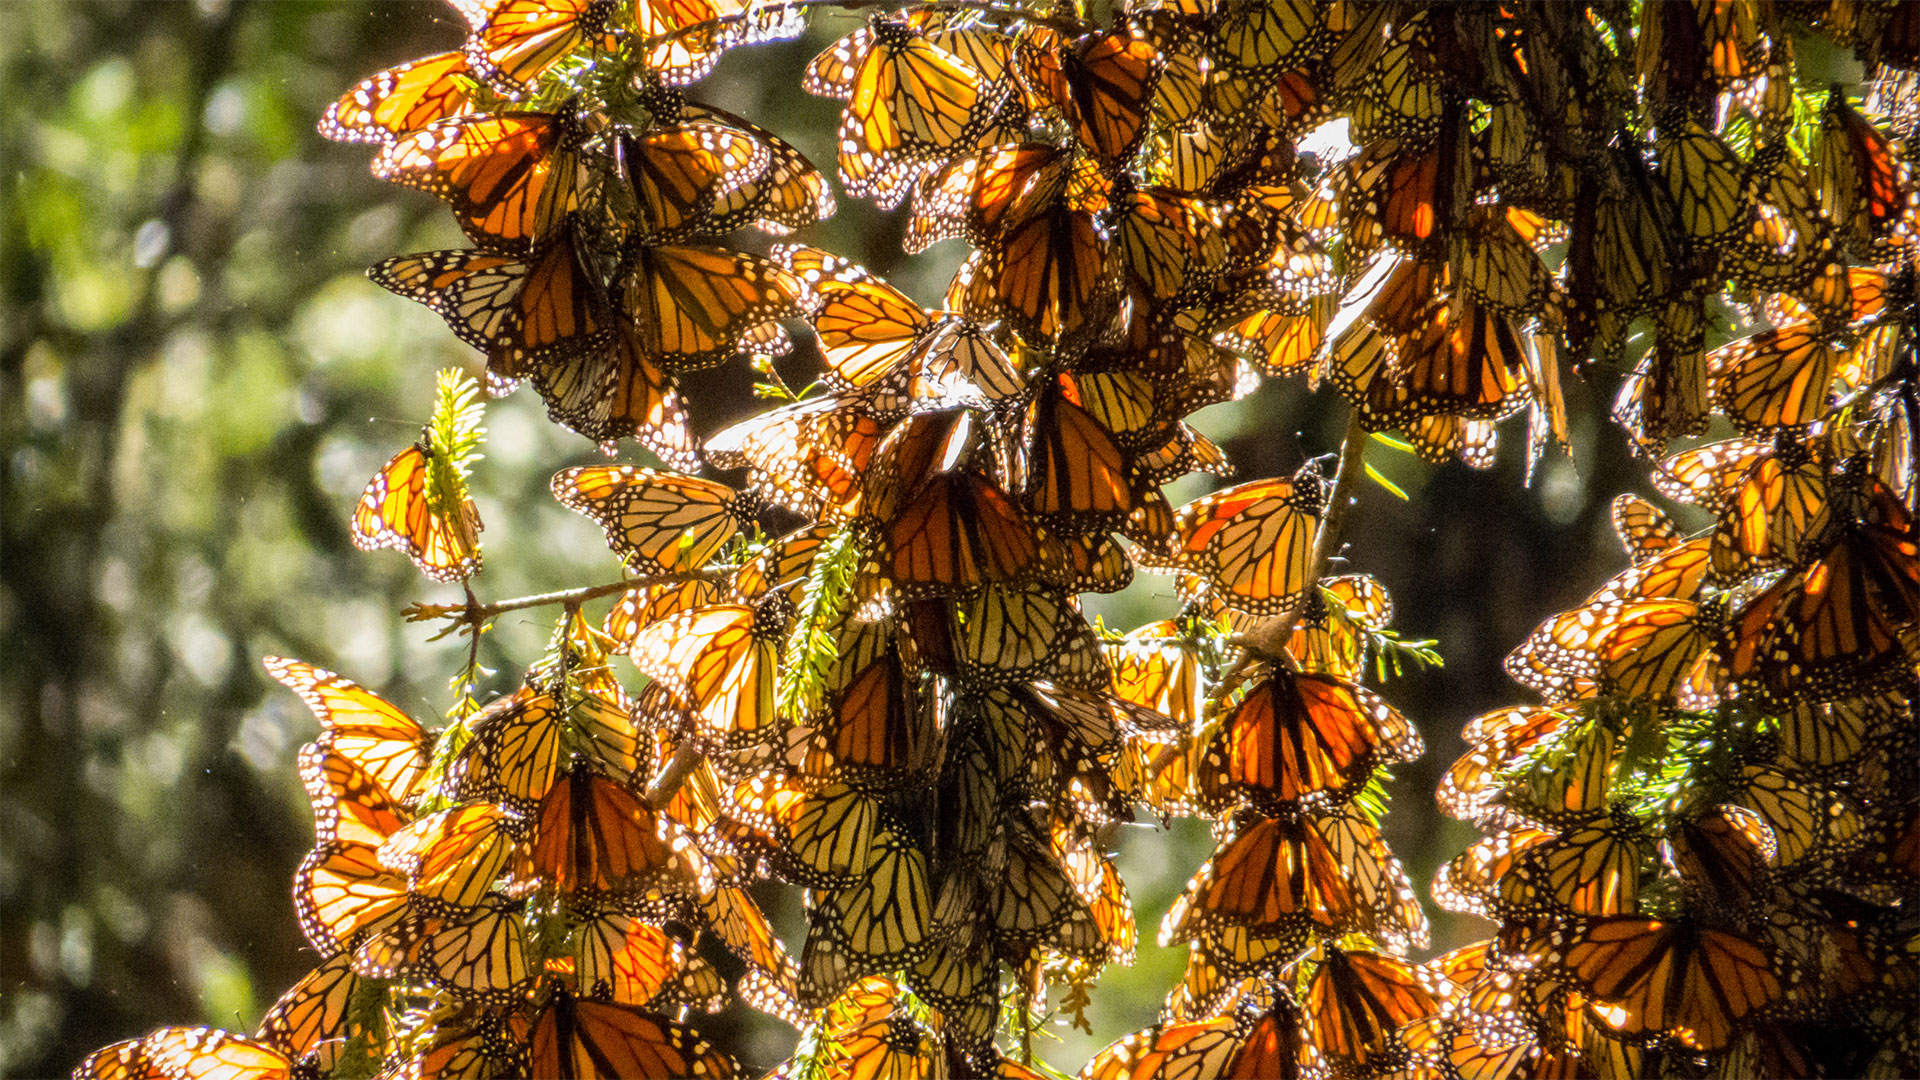 Hundreds of butterflies cluster on tree branches, making it look like an orange and black chandelier.